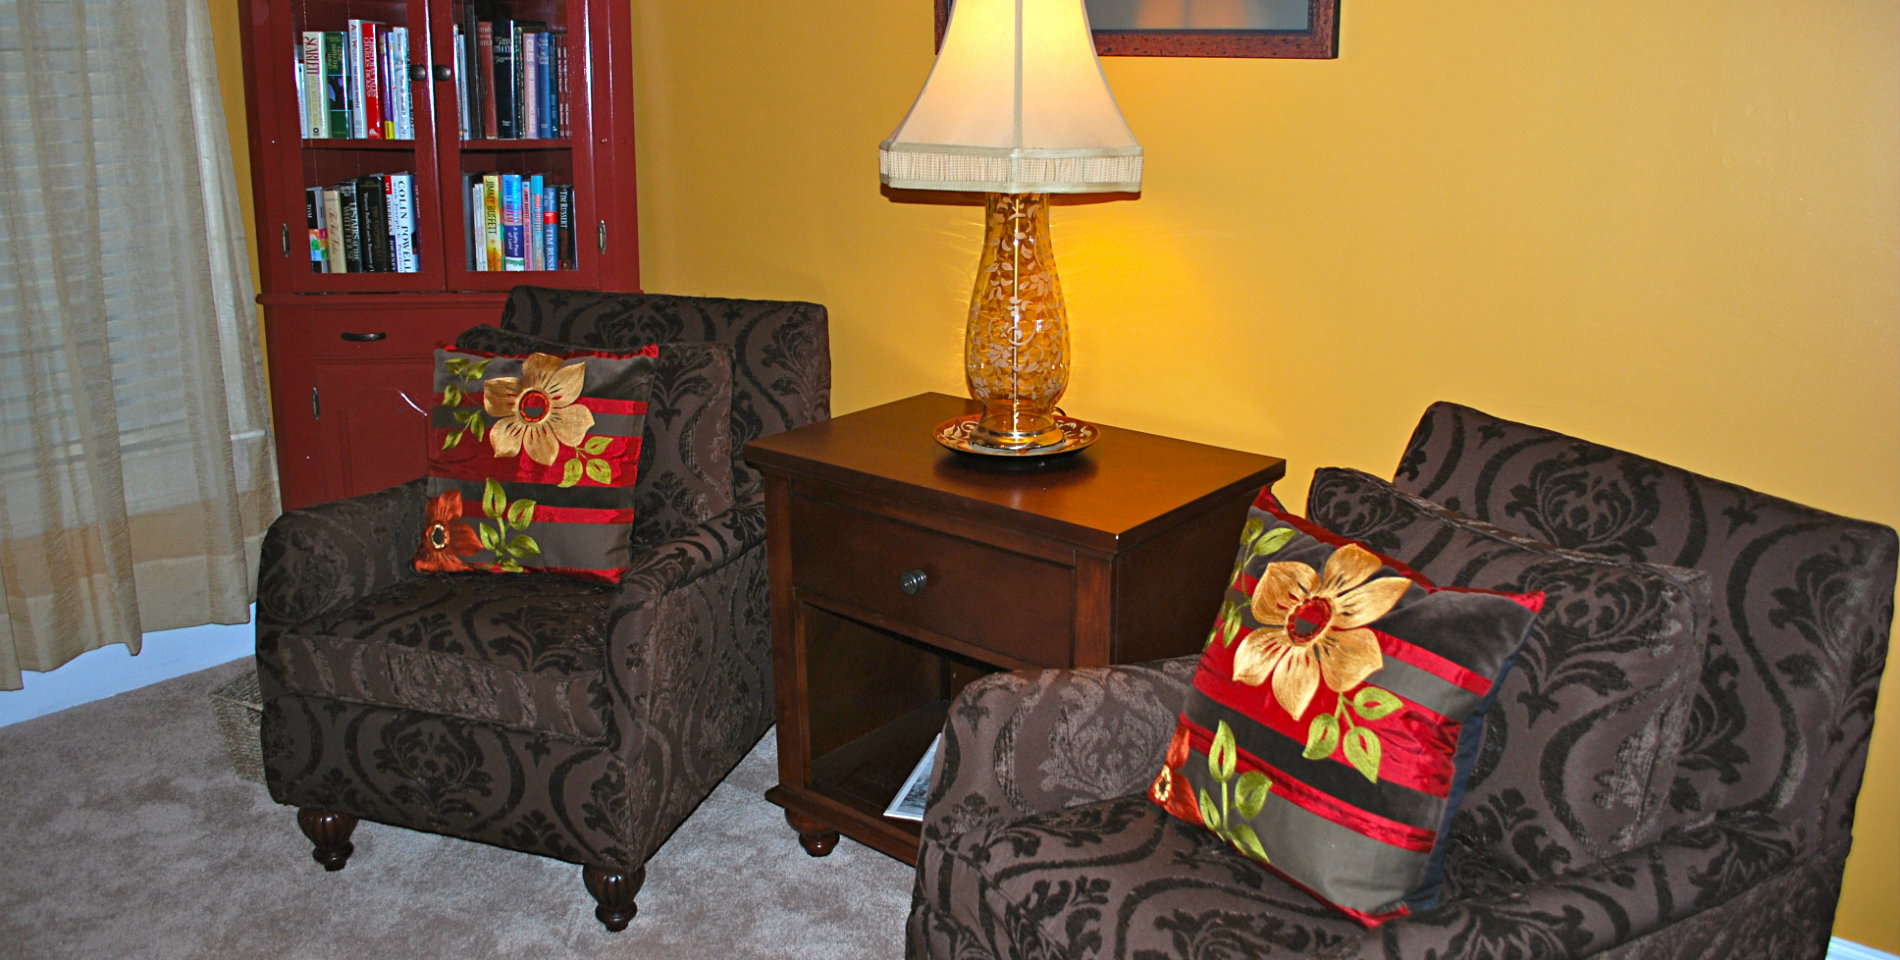 Two plush paisley patterned chairs with red and black striped throw pillows. 